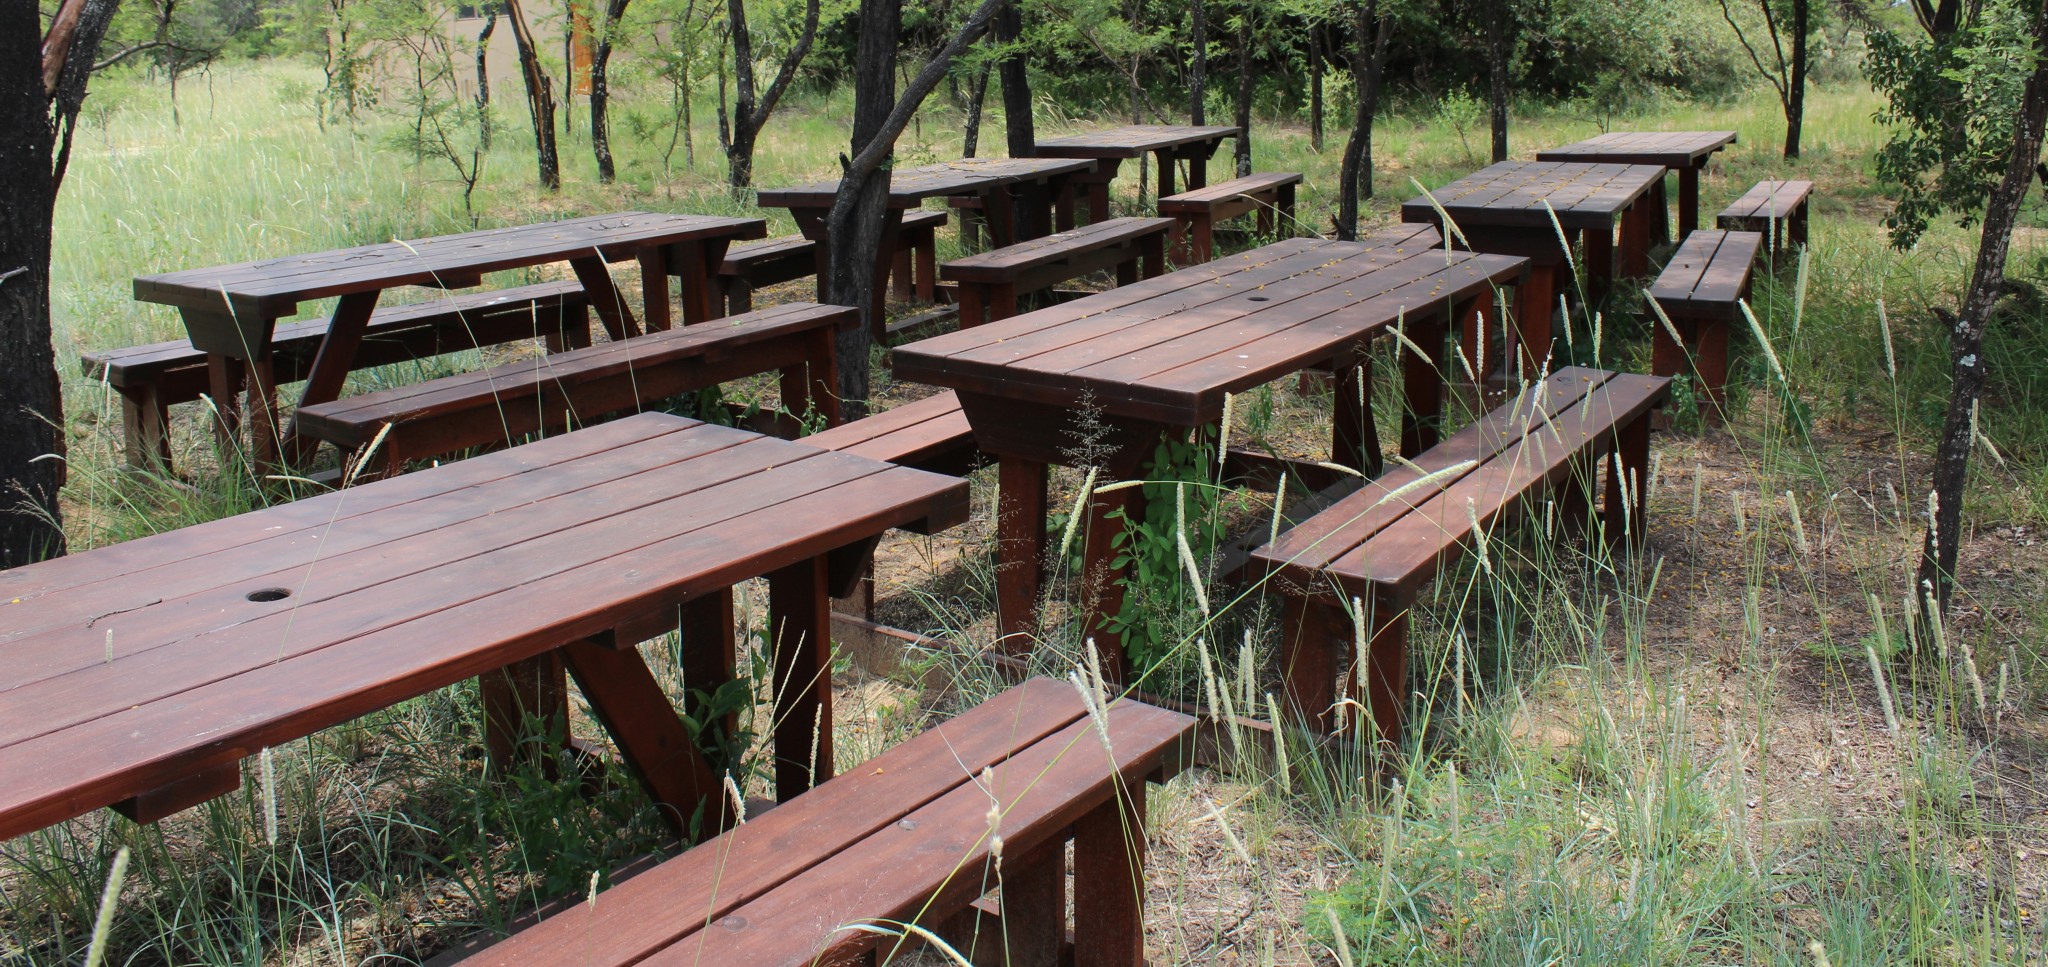 Picnic tables donated by TWT to the Waterberg Living Museum